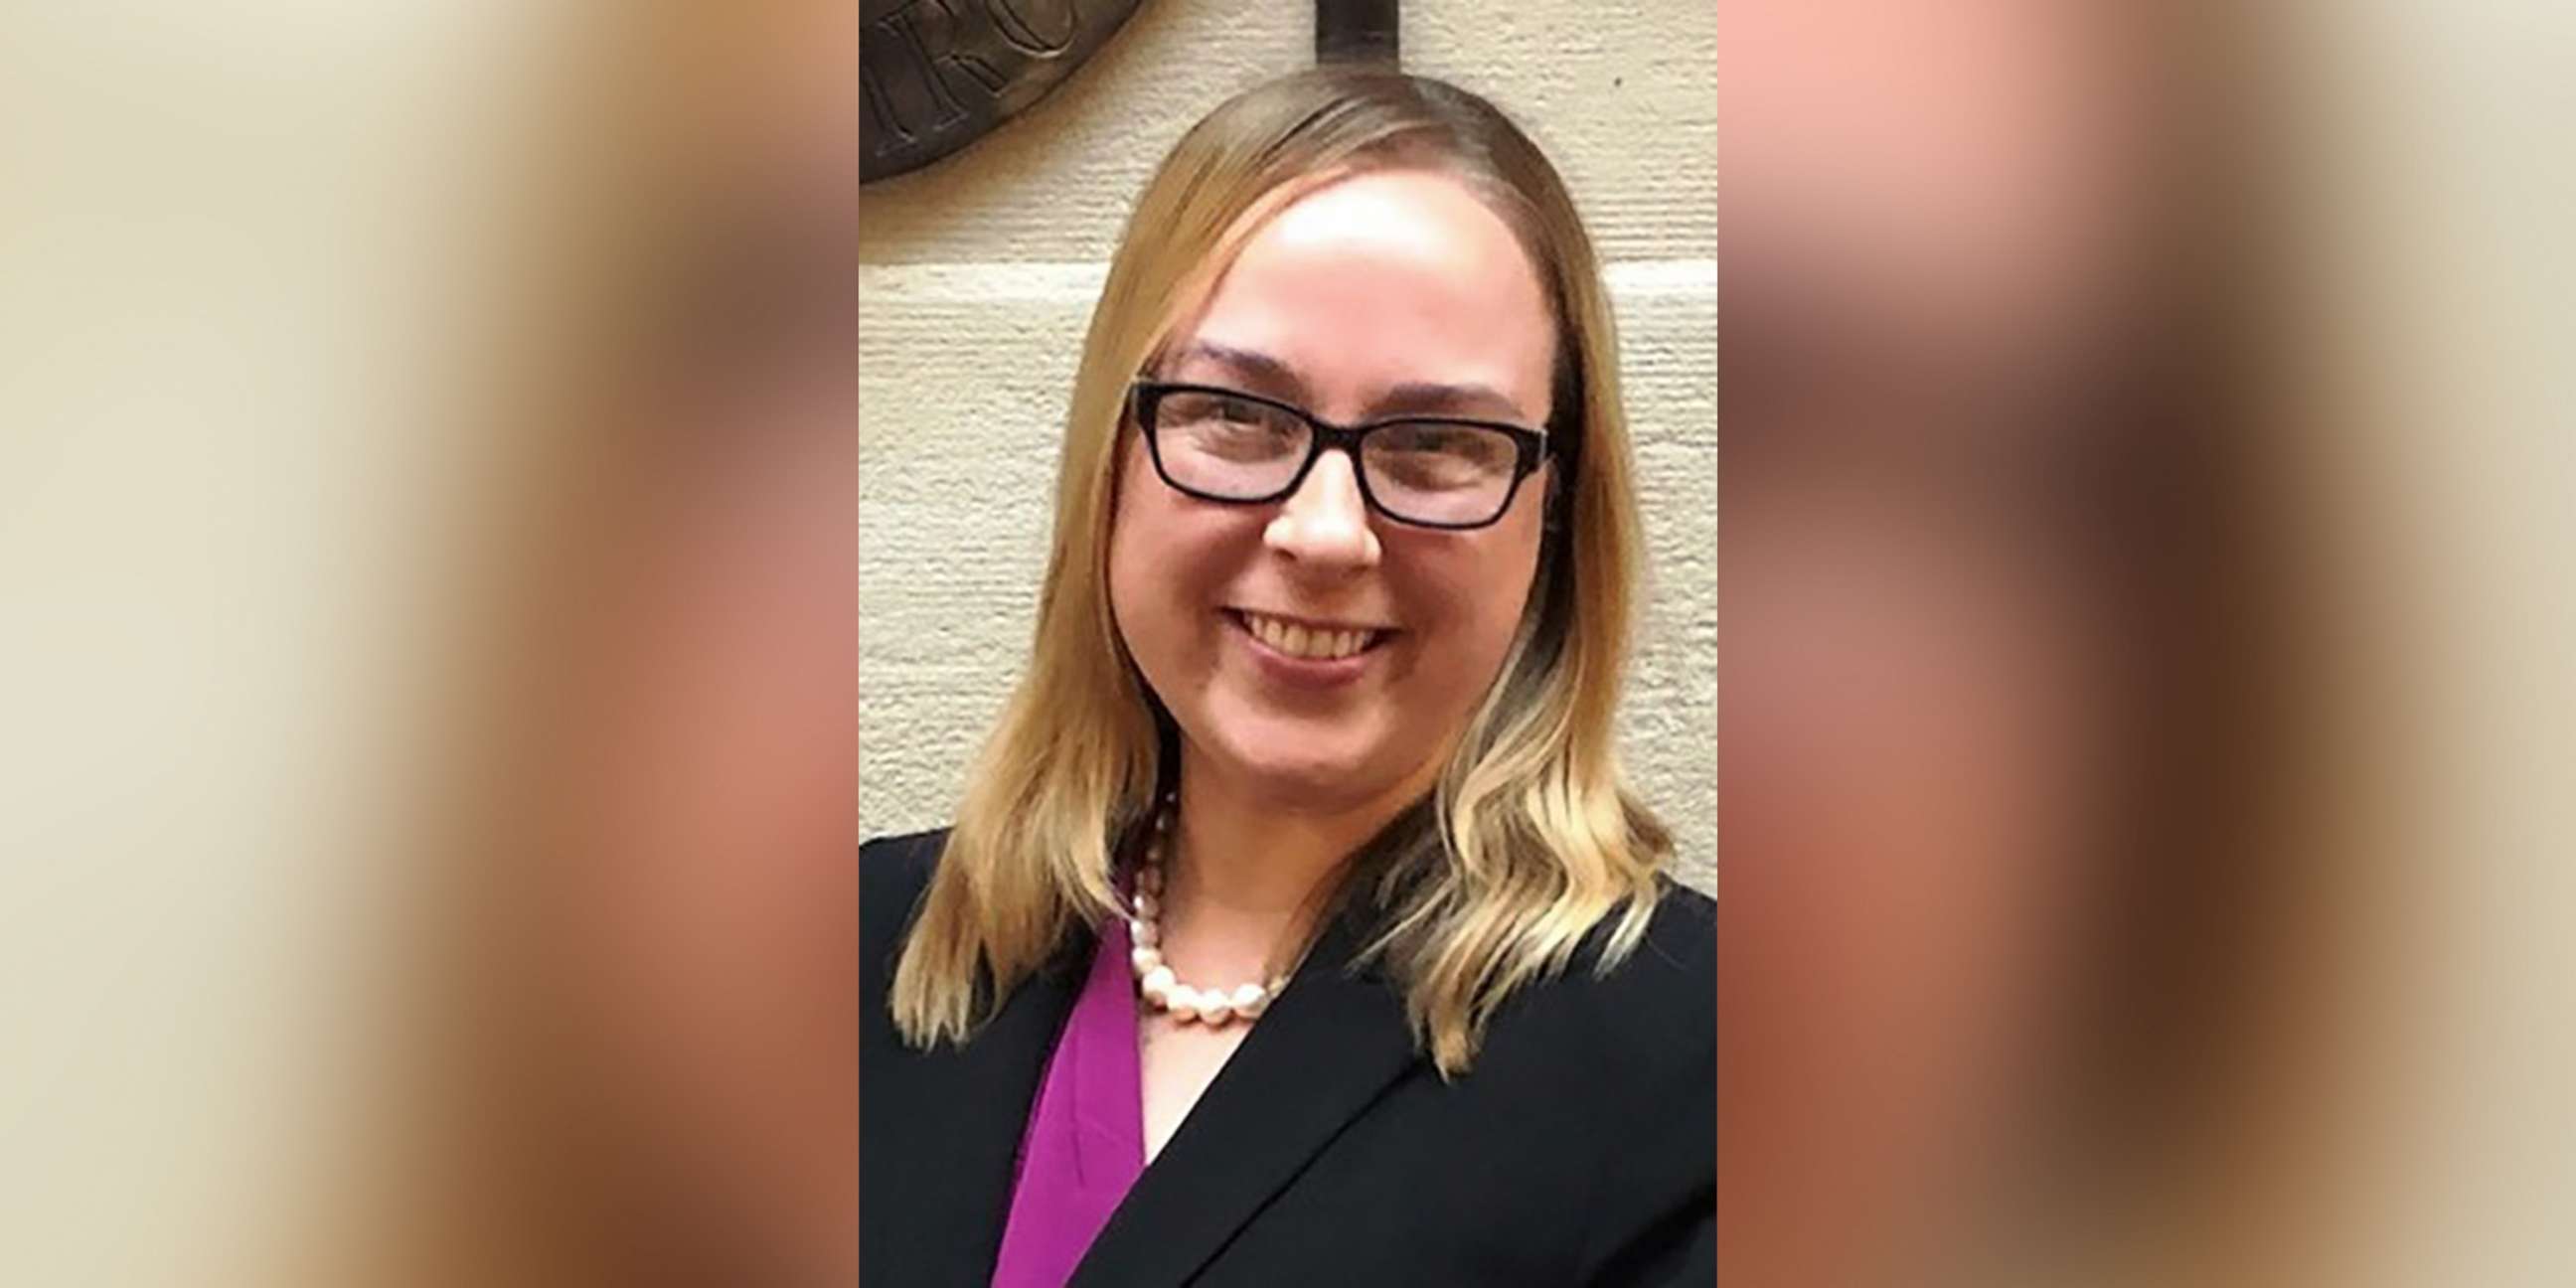 PHOTO: Stacia Hollingshead, pictured in this undated photo, was fatally shot on March 23, 2019 in Beaver Dam, Wis.